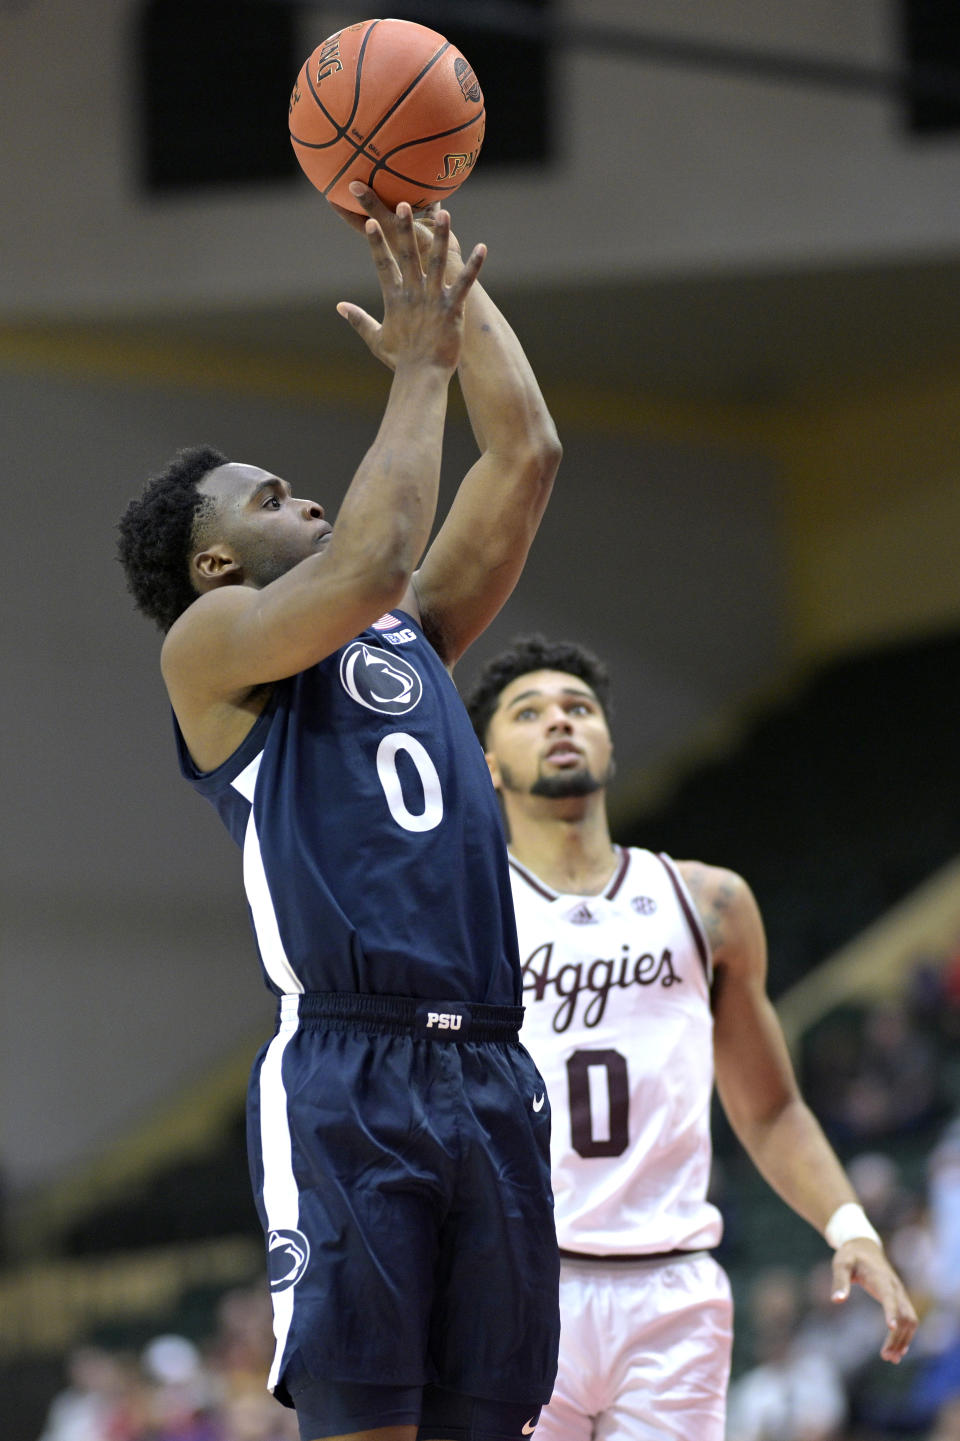 Penn State guard Kanye Clary (0) shoots in front of Texas A&M guard Jace Carter during the first half of an NCAA college basketball game, Thursday, Nov. 23, 2023, in Kissimmee, Fla. (AP Photo/Phelan M. Ebenhack)